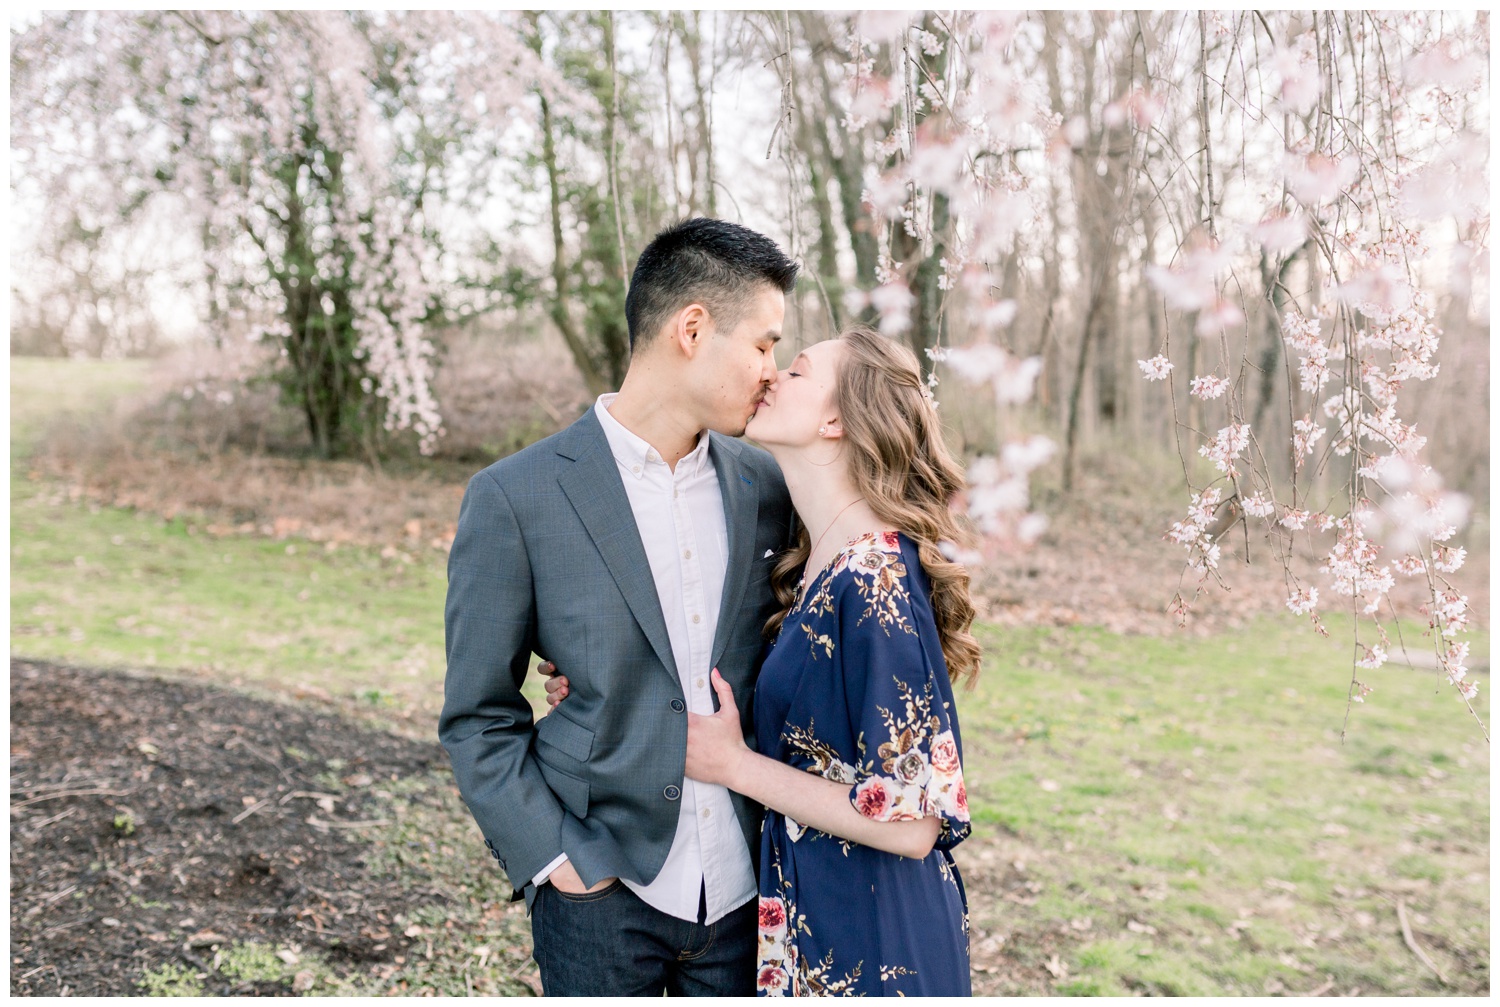 Ault Park Engagement Pictures with Cherry Trees